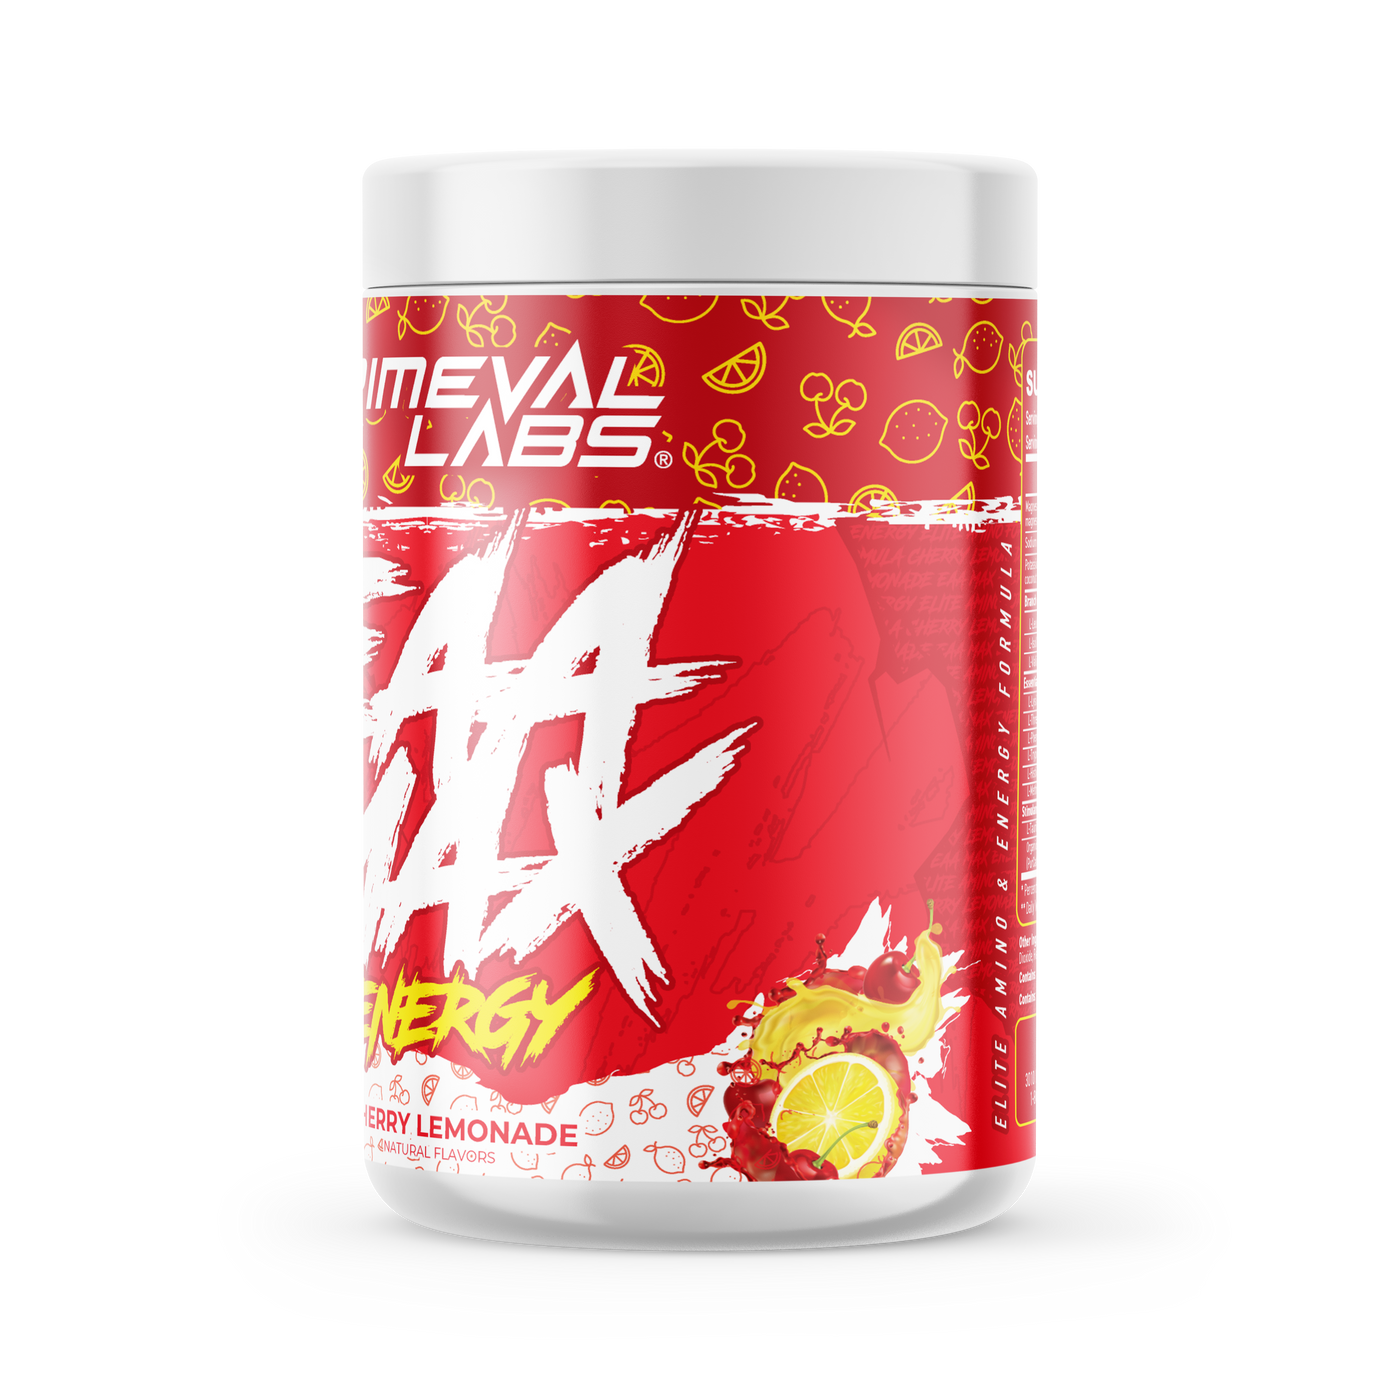 eaa max bcaa energy essential amino acids supplement with caffeine